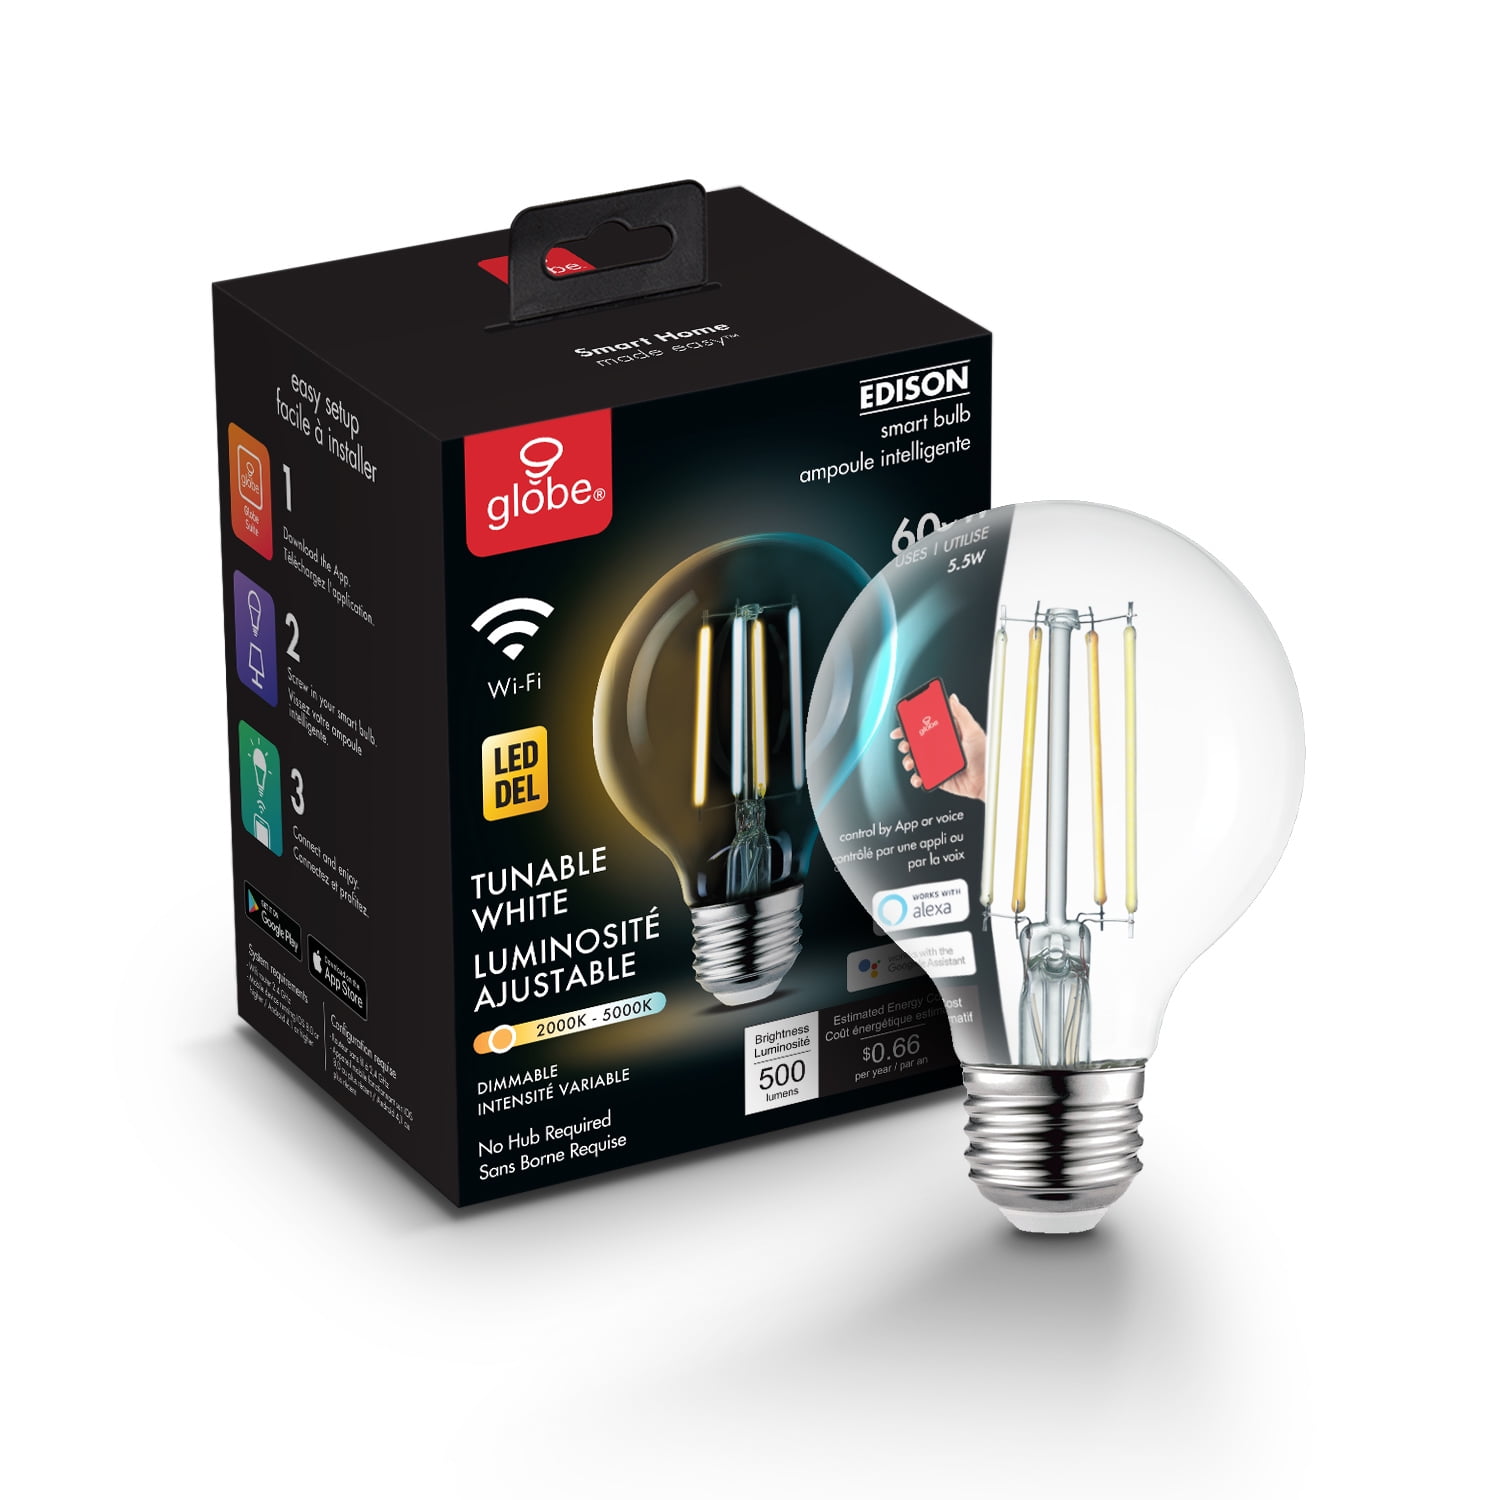 zonlicht Voorzichtigheid Illusie Globe Electric Wi-Fi Smart 60W Equivalent Vintage Filament Tunable White  LED Light Bulb, No Hub Required, Voice Activated, G25 Shape, E26 Base,  34920 - Walmart.com